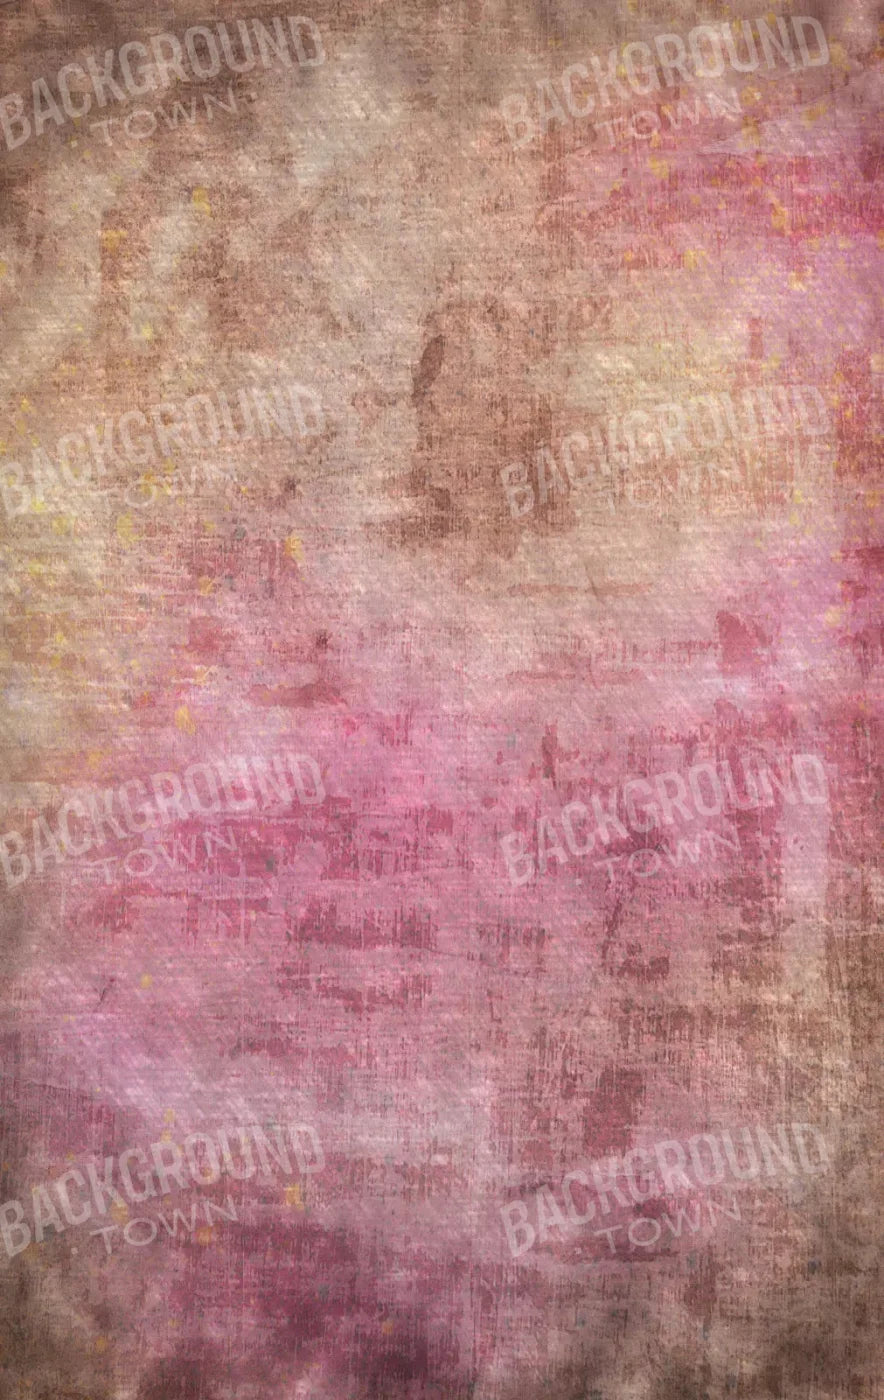 Chocoberry 10X16 Ultracloth ( 120 X 192 Inch ) Backdrop